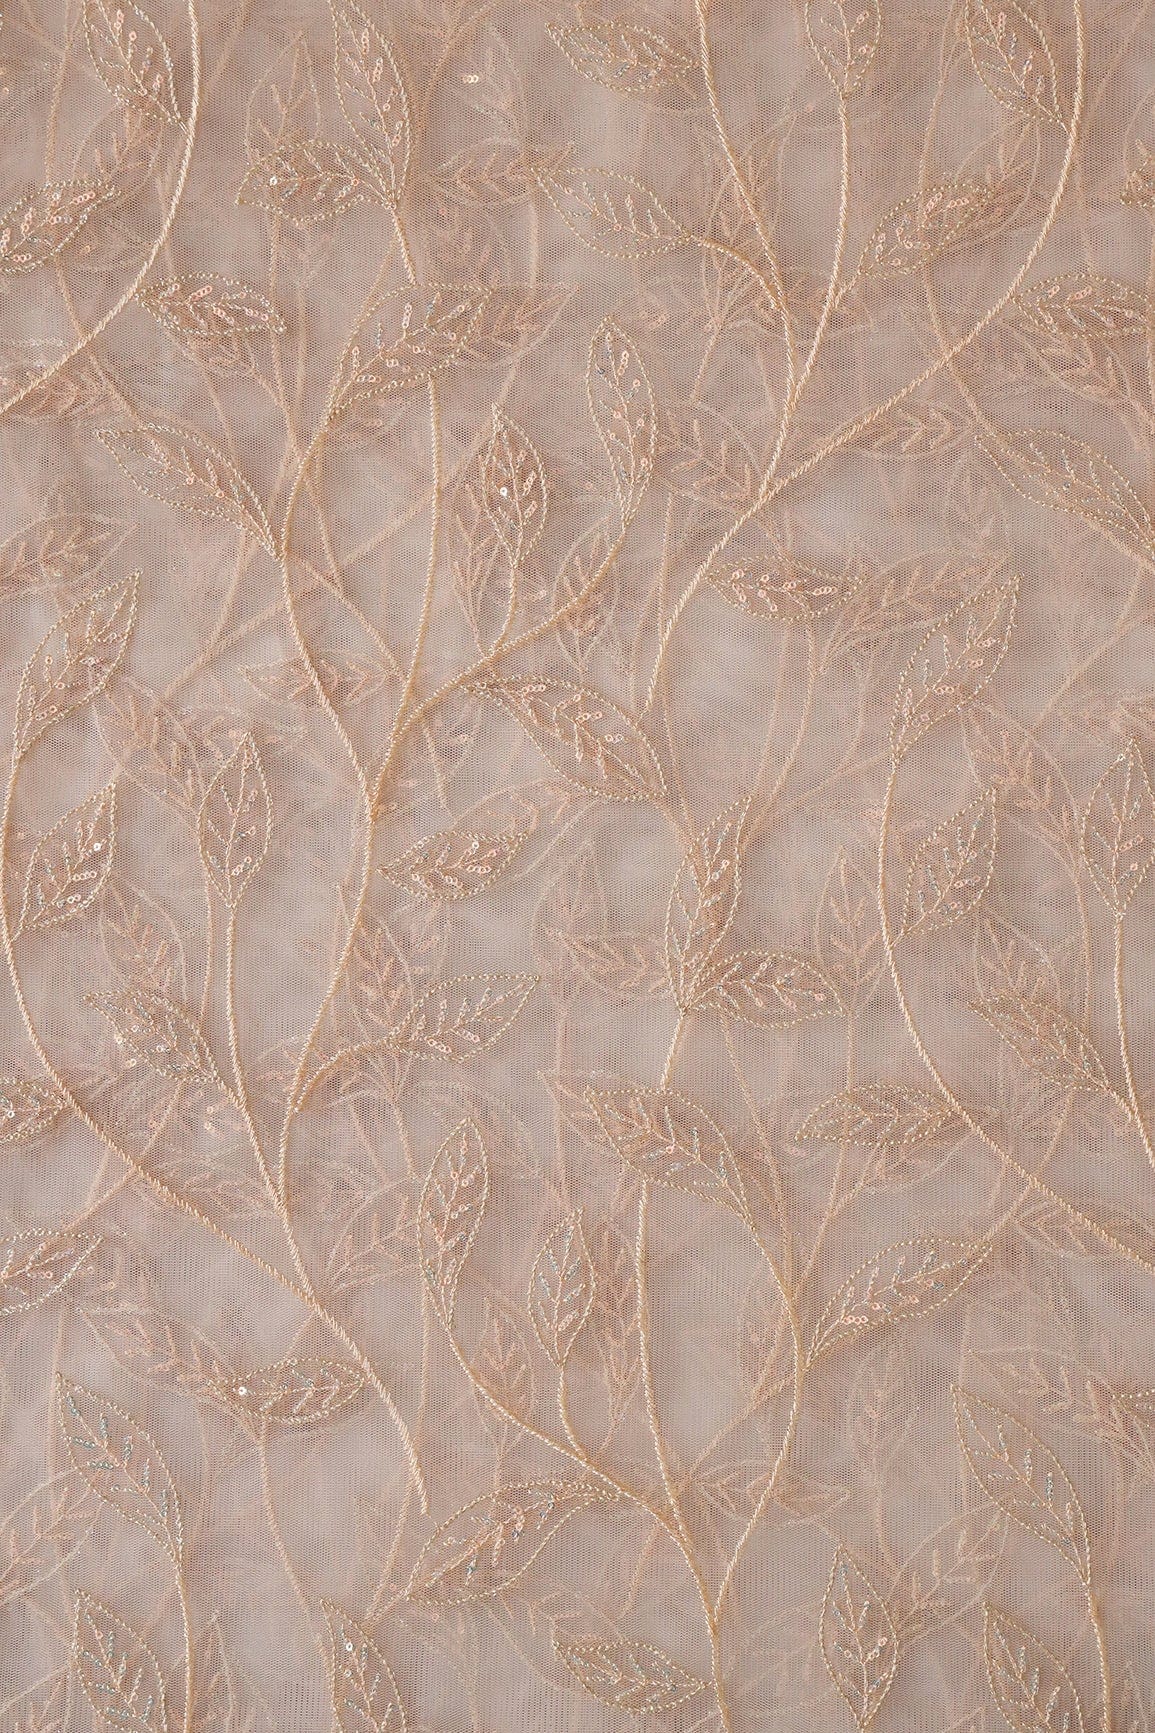 doeraa Embroidery Fabrics Beige Thread With Sequins Beautiful Leafy Embroidery On Cream Soft Net Fabric